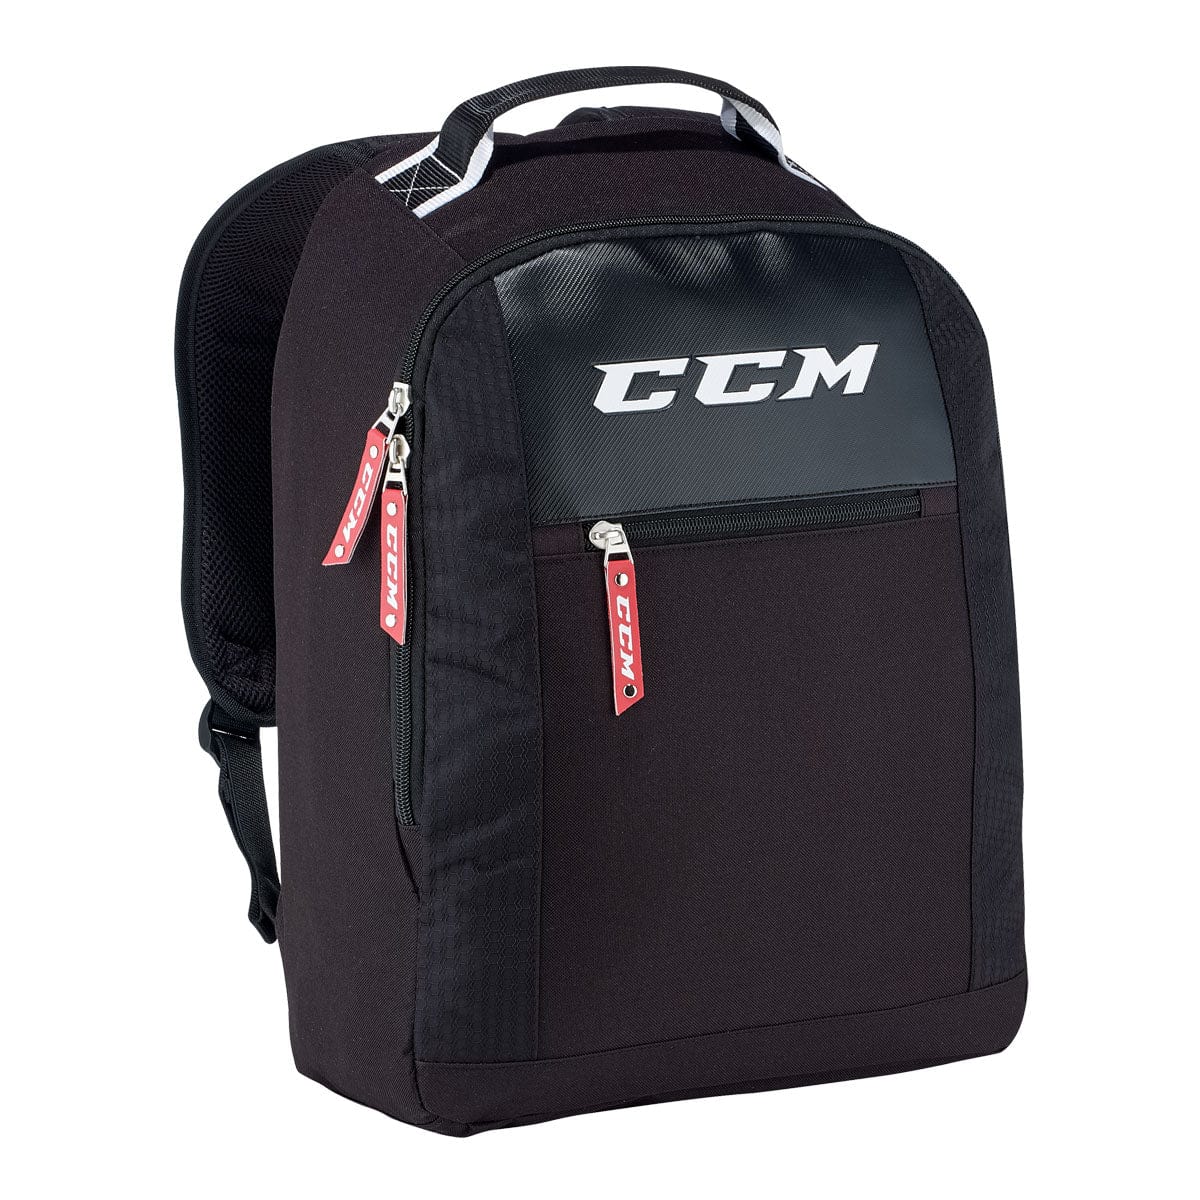 CCM Team Backpack - The Hockey Shop Source For Sports